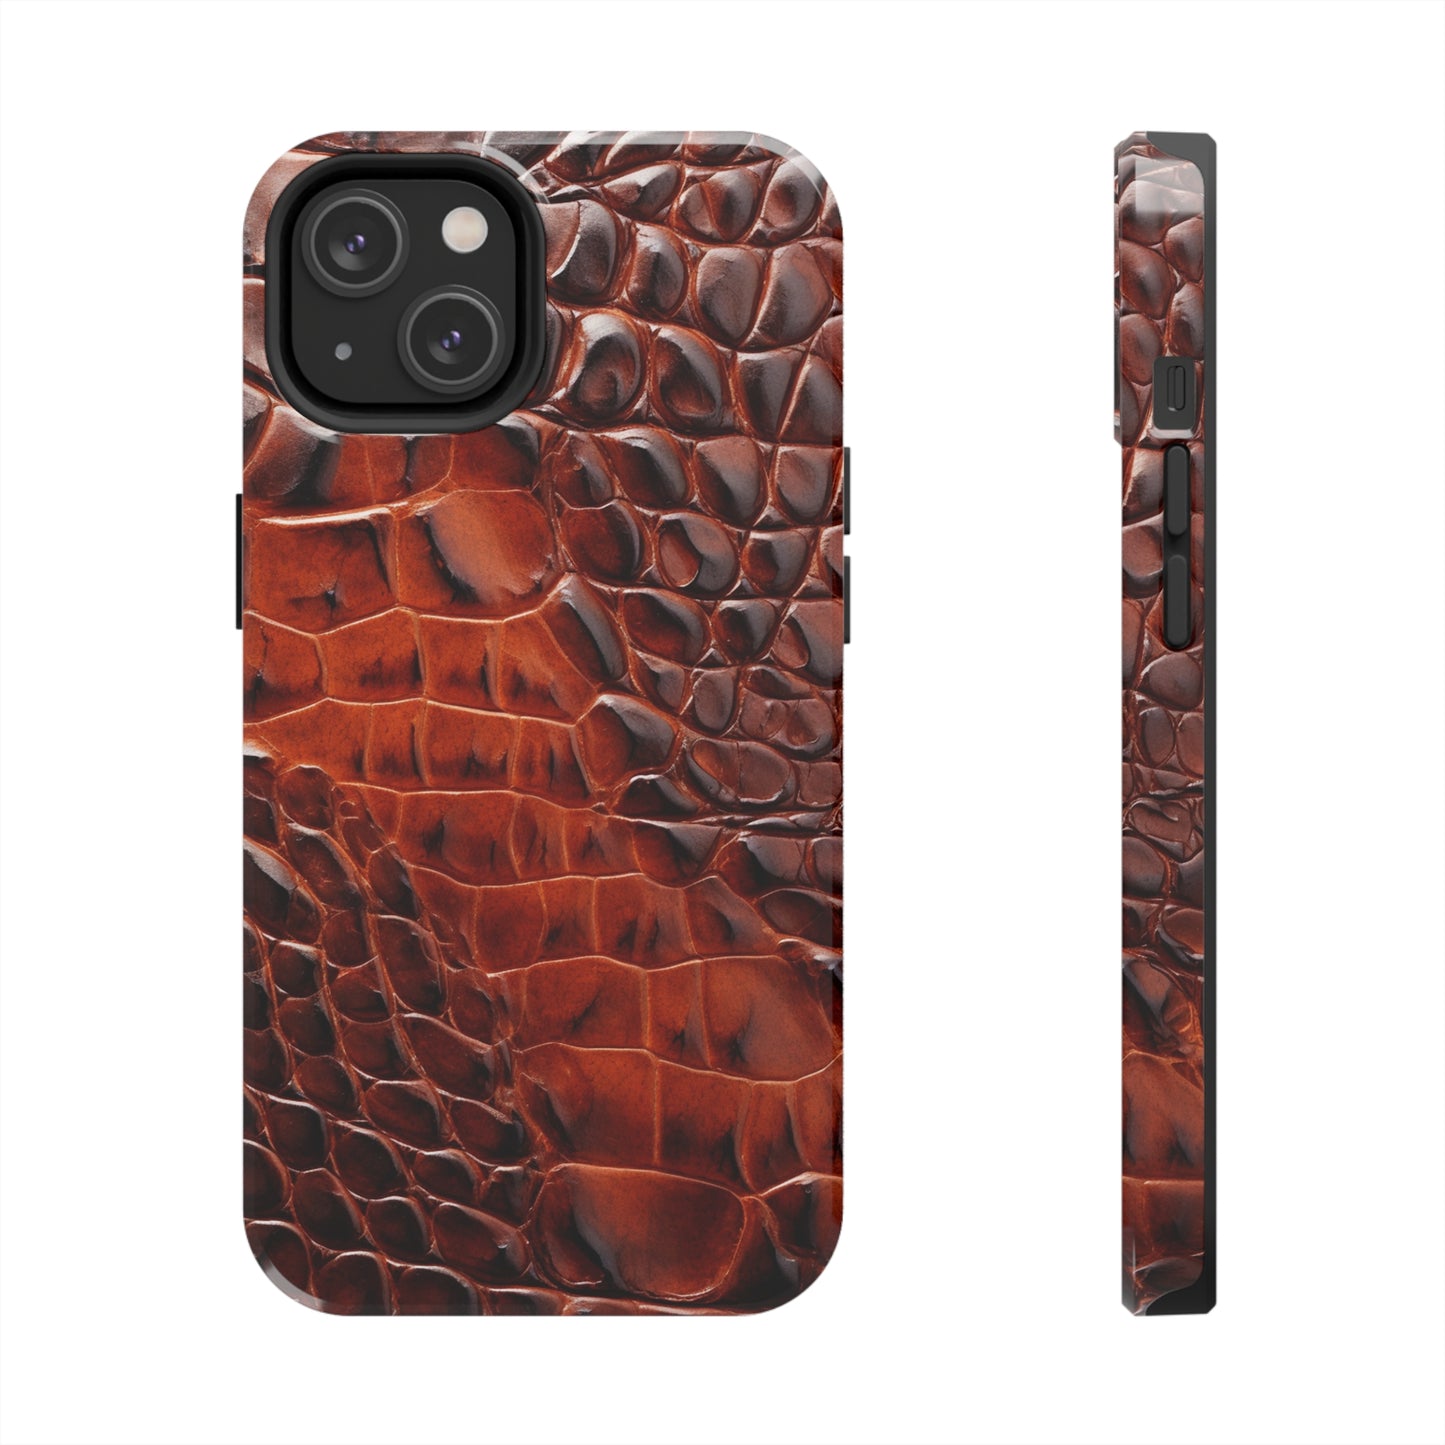 Reliable Protection - Alligator Skin Case